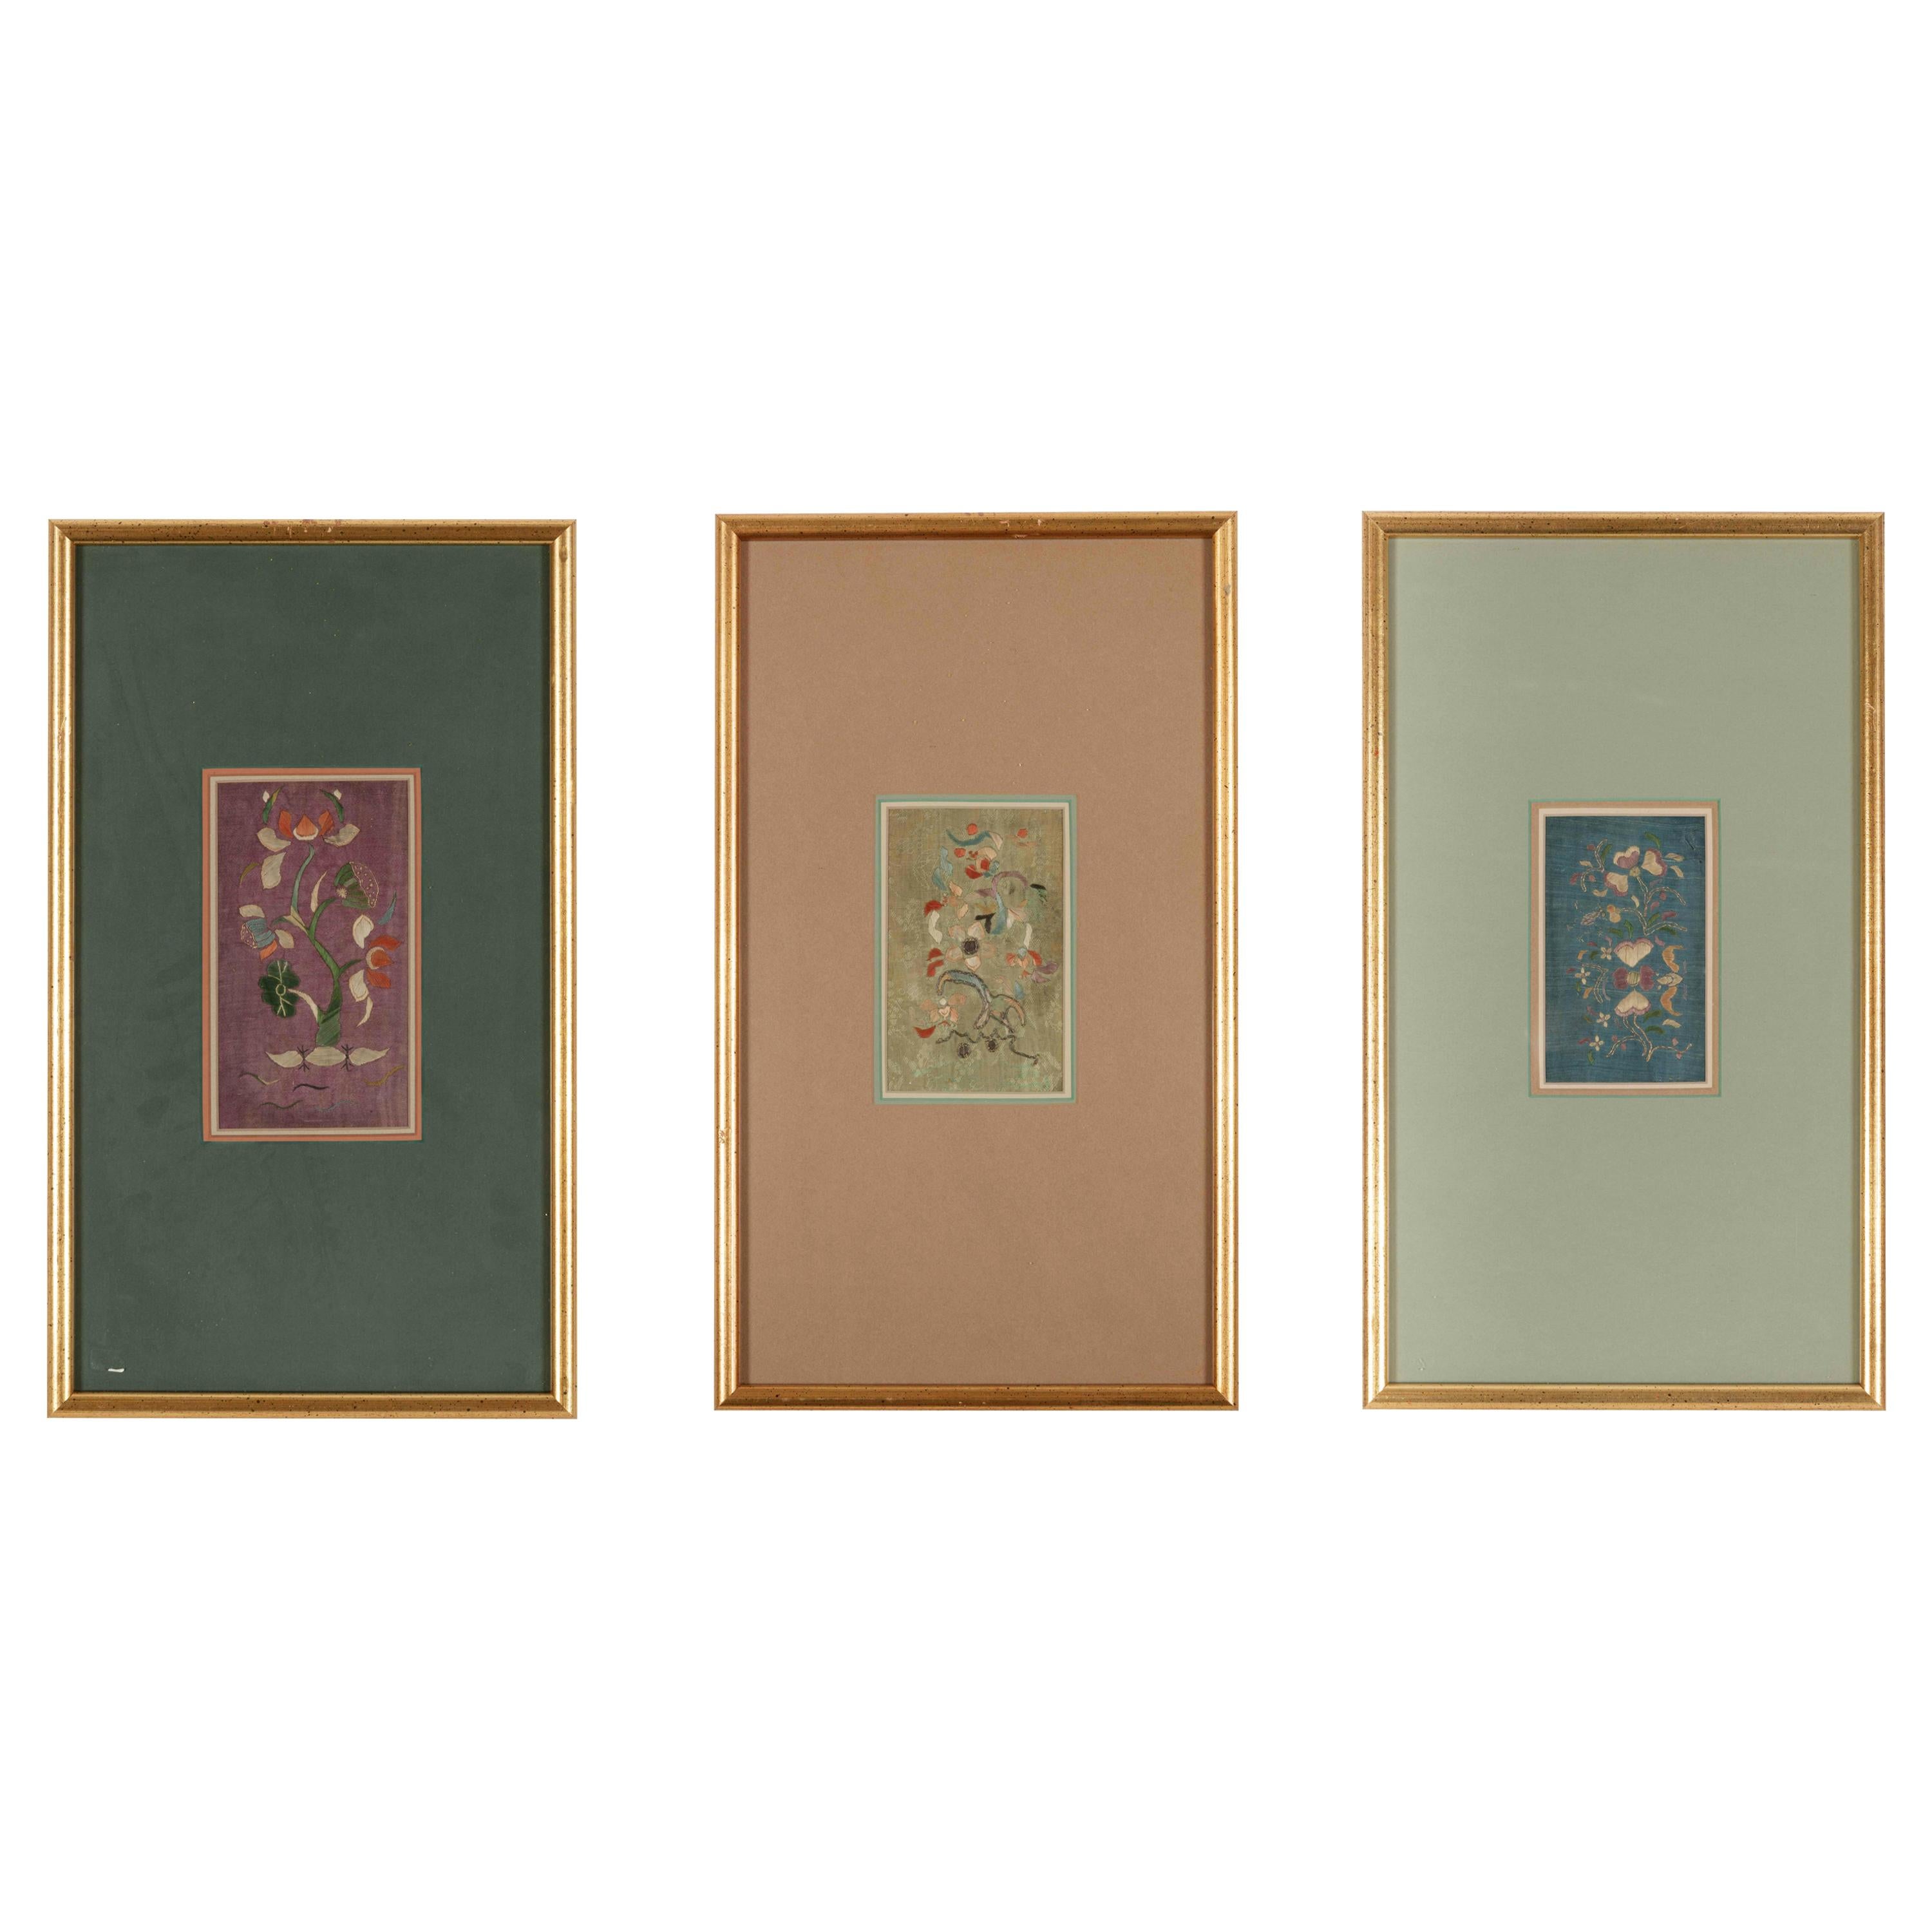 Set of Three Framed Antique Chinese Textiles Qing Dynasty Provenance